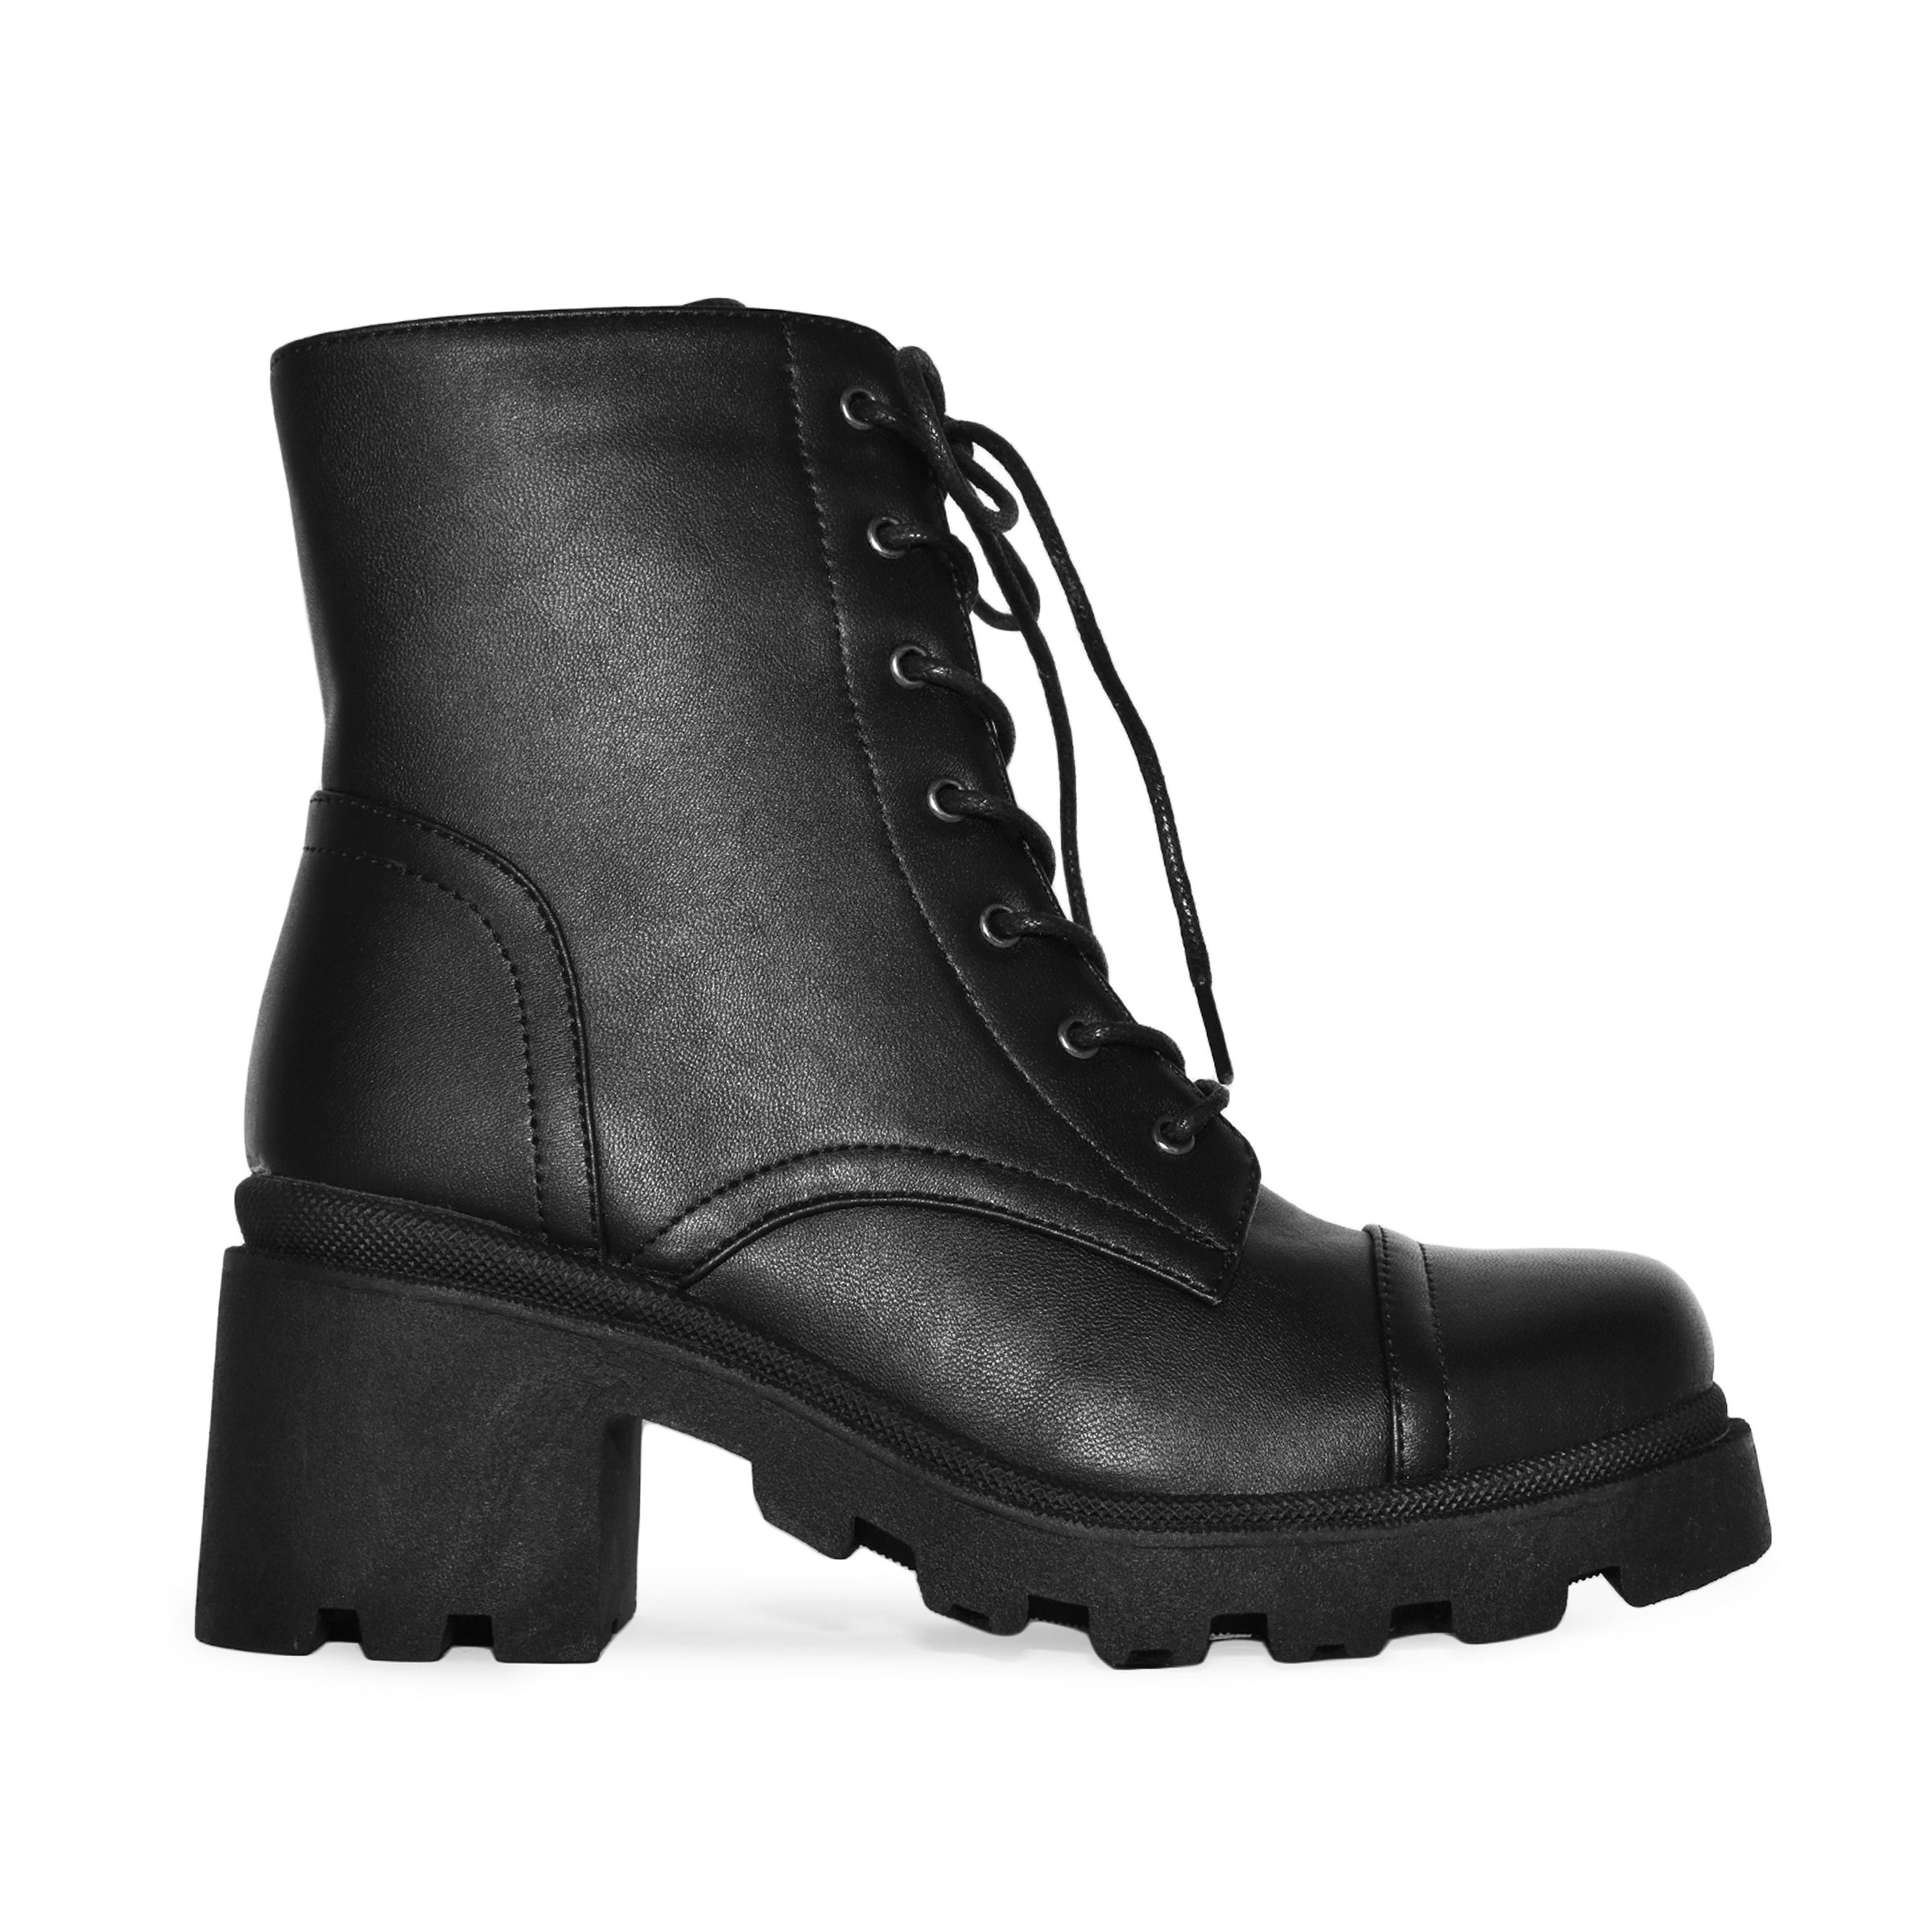 If The Shoe Fits: Forever 21 Heeled Combat Boots Edition | lifewithlilred